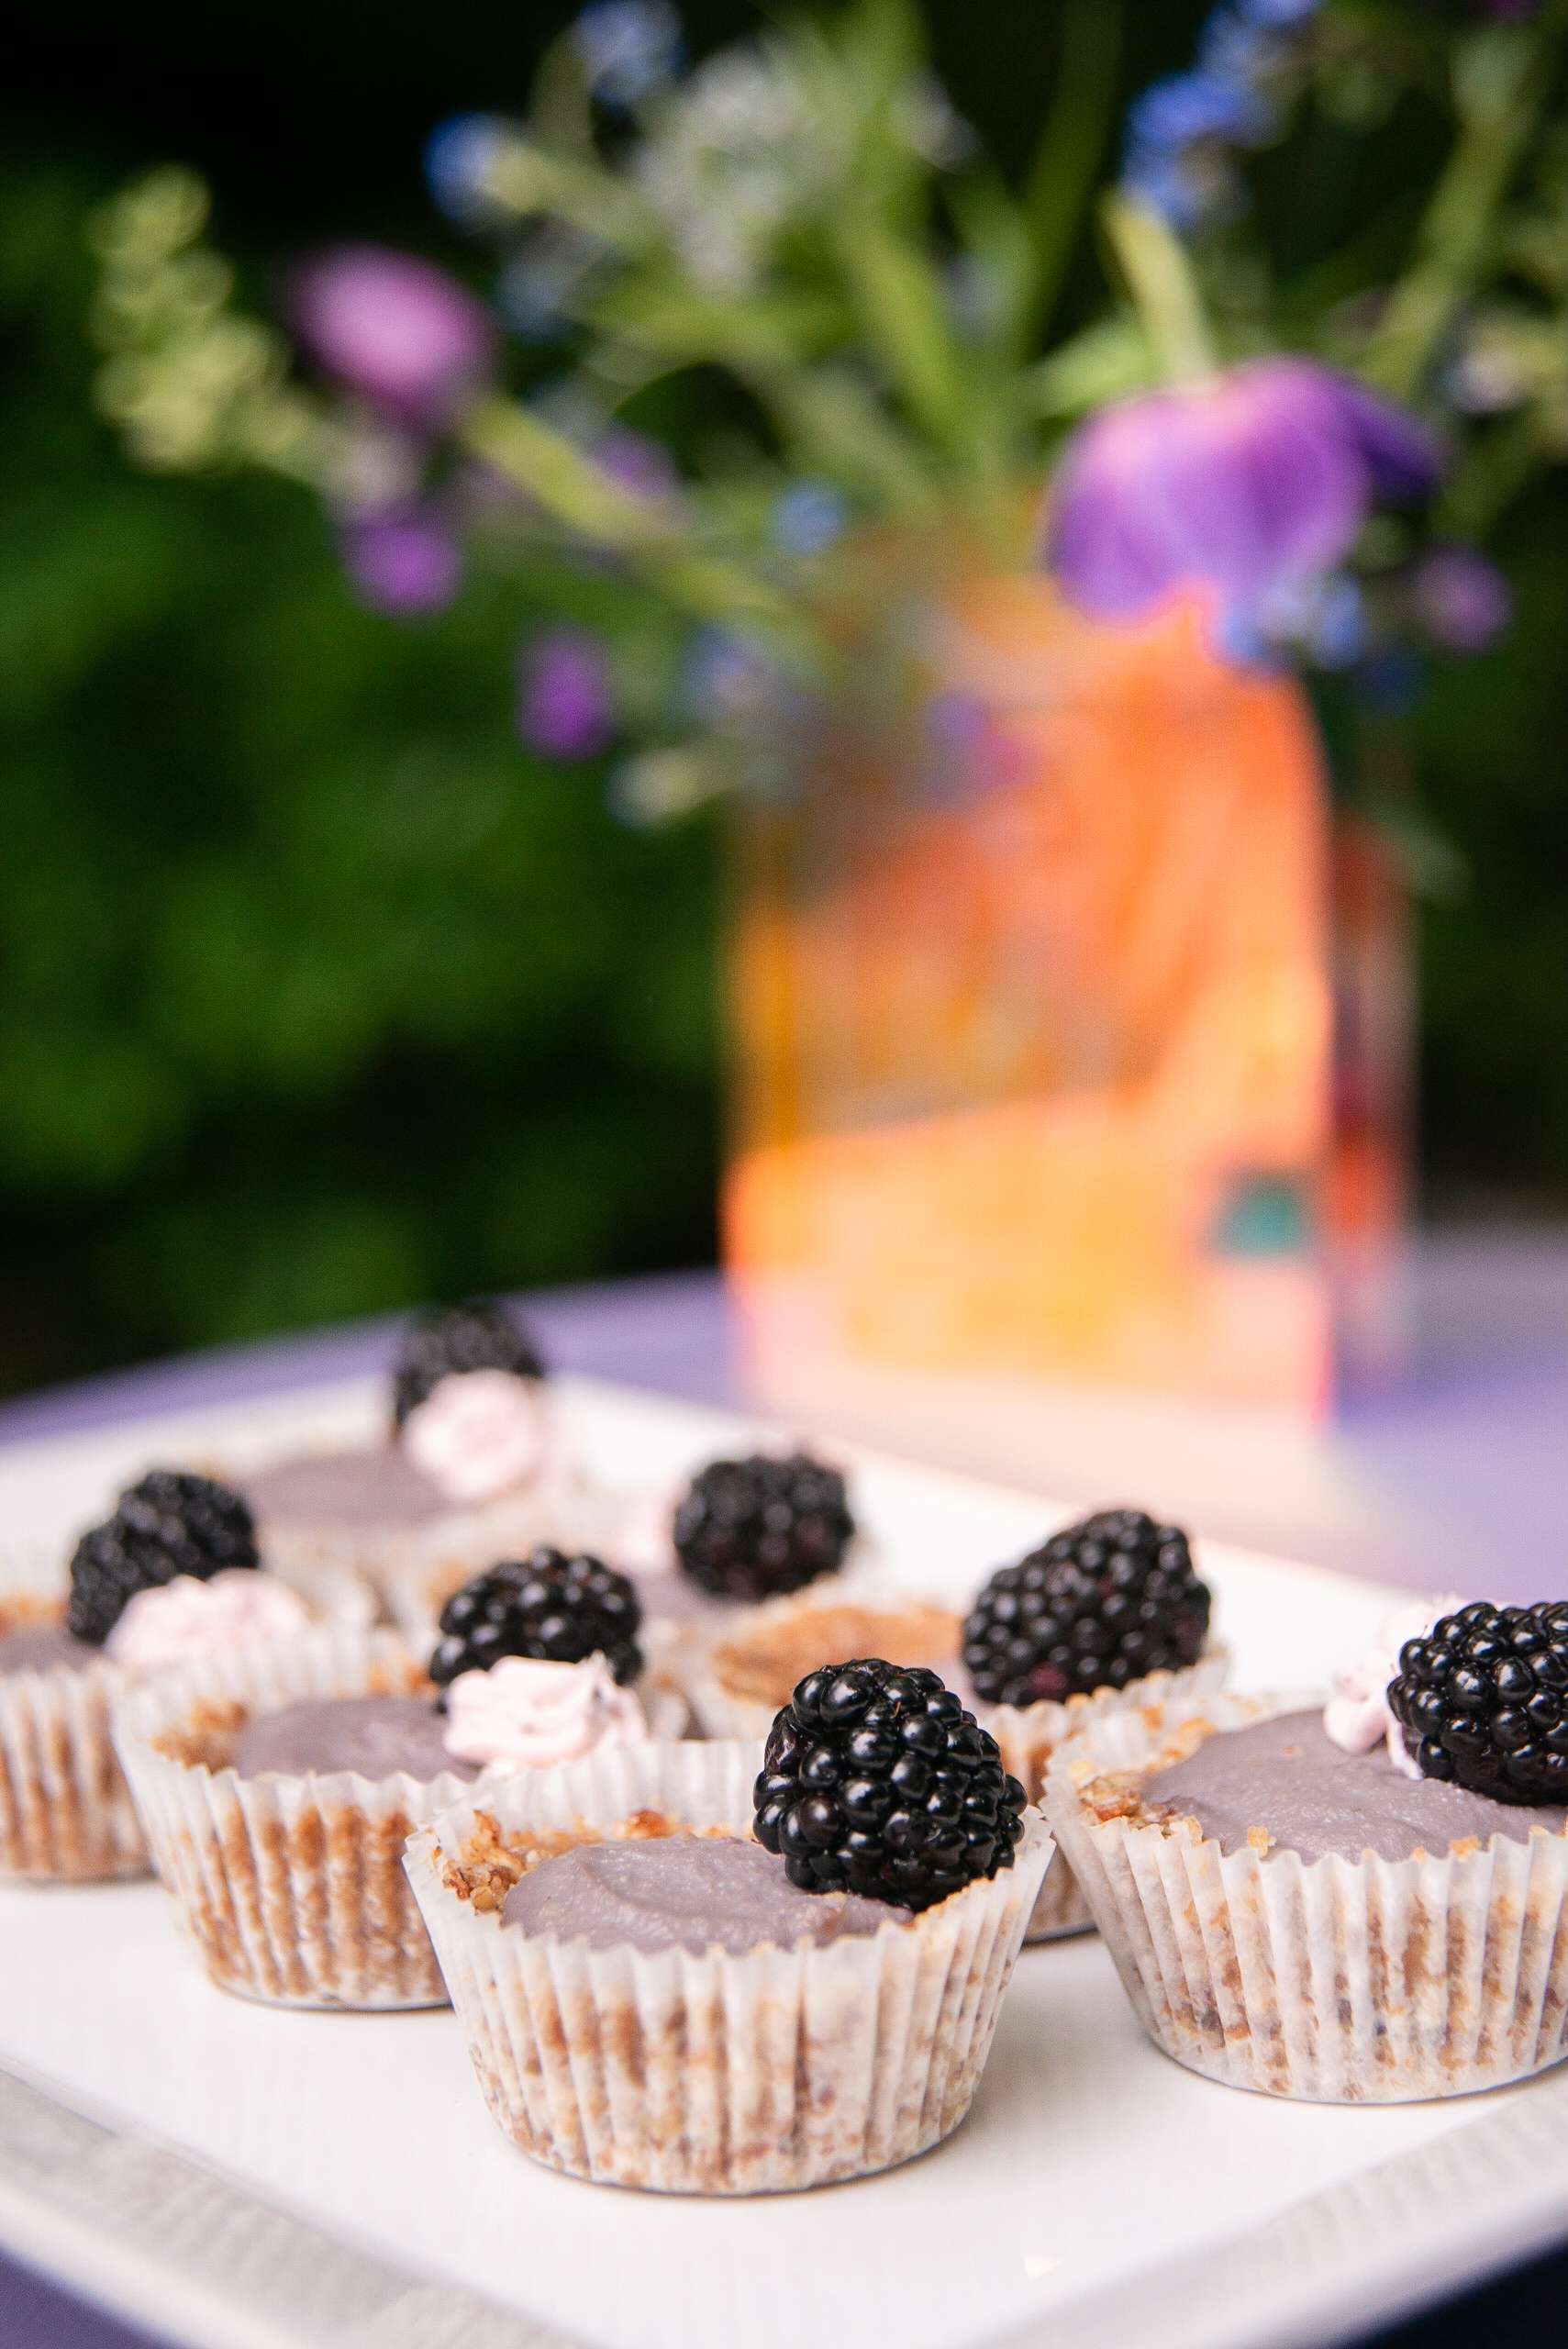 Blackberry cheesecakes being served at Enchanted Hills Wedding